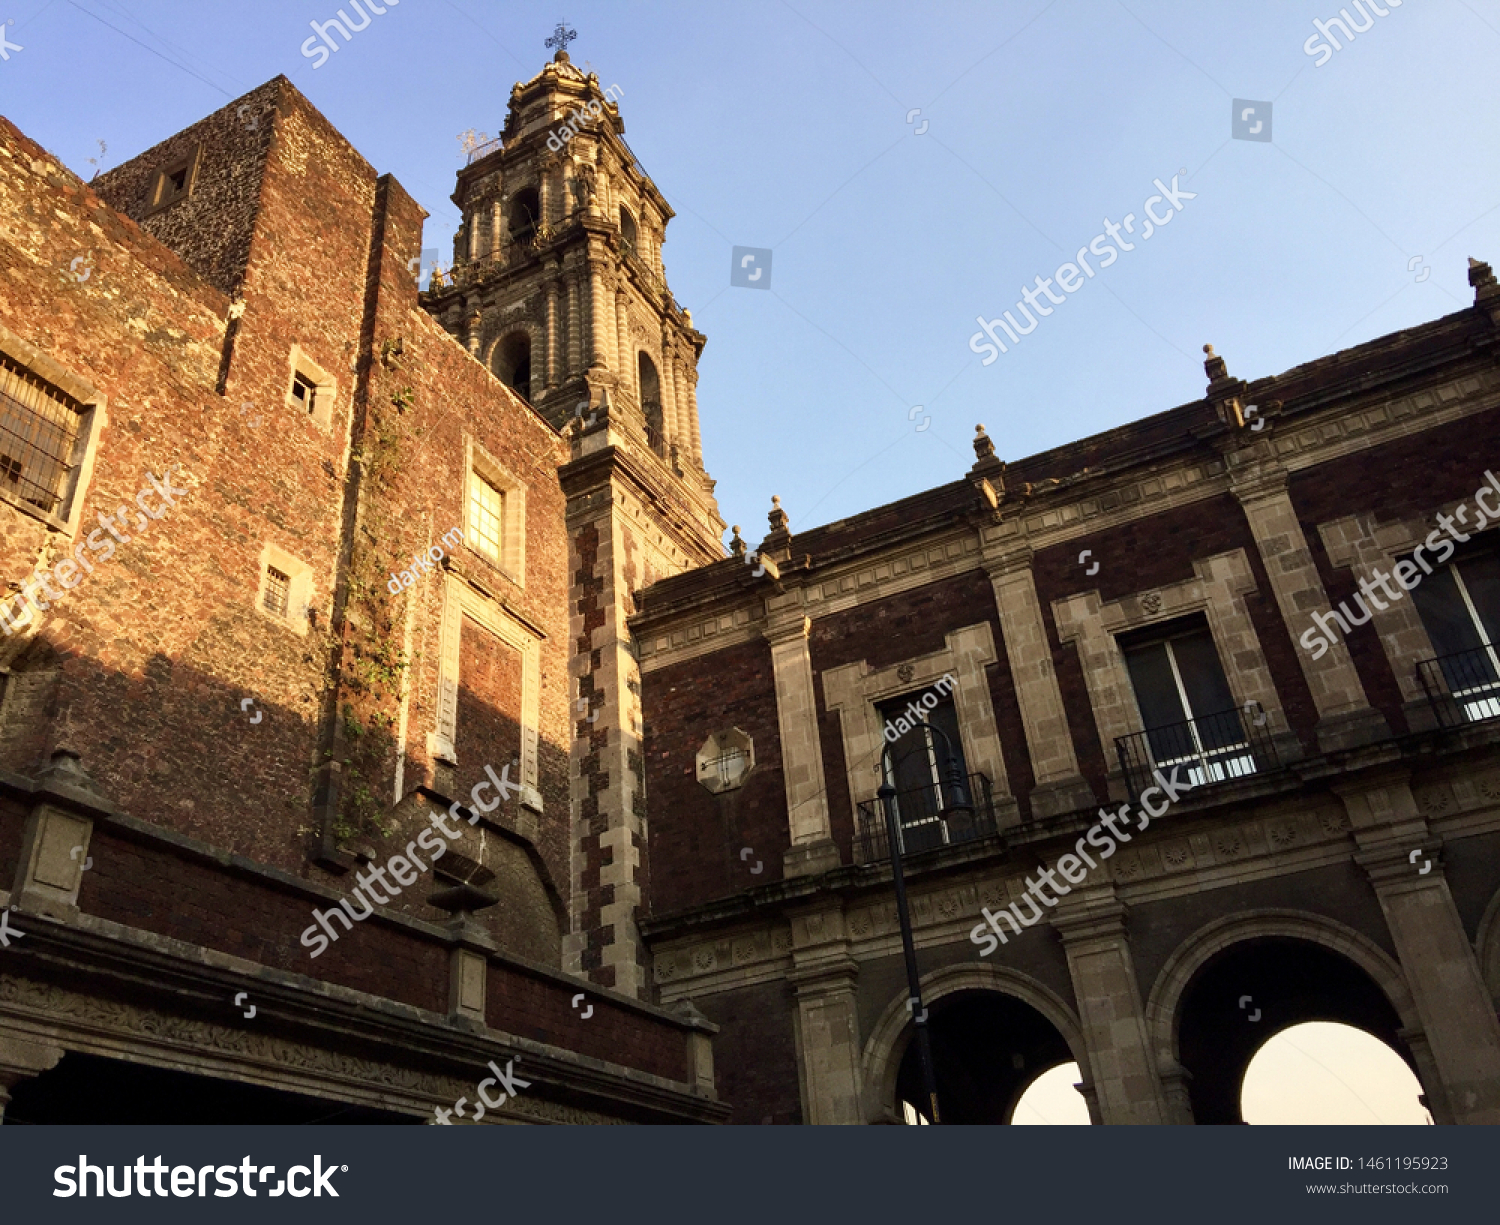 Stock Photo Spanish Colonial Architecture In Mexico City 1461195923 